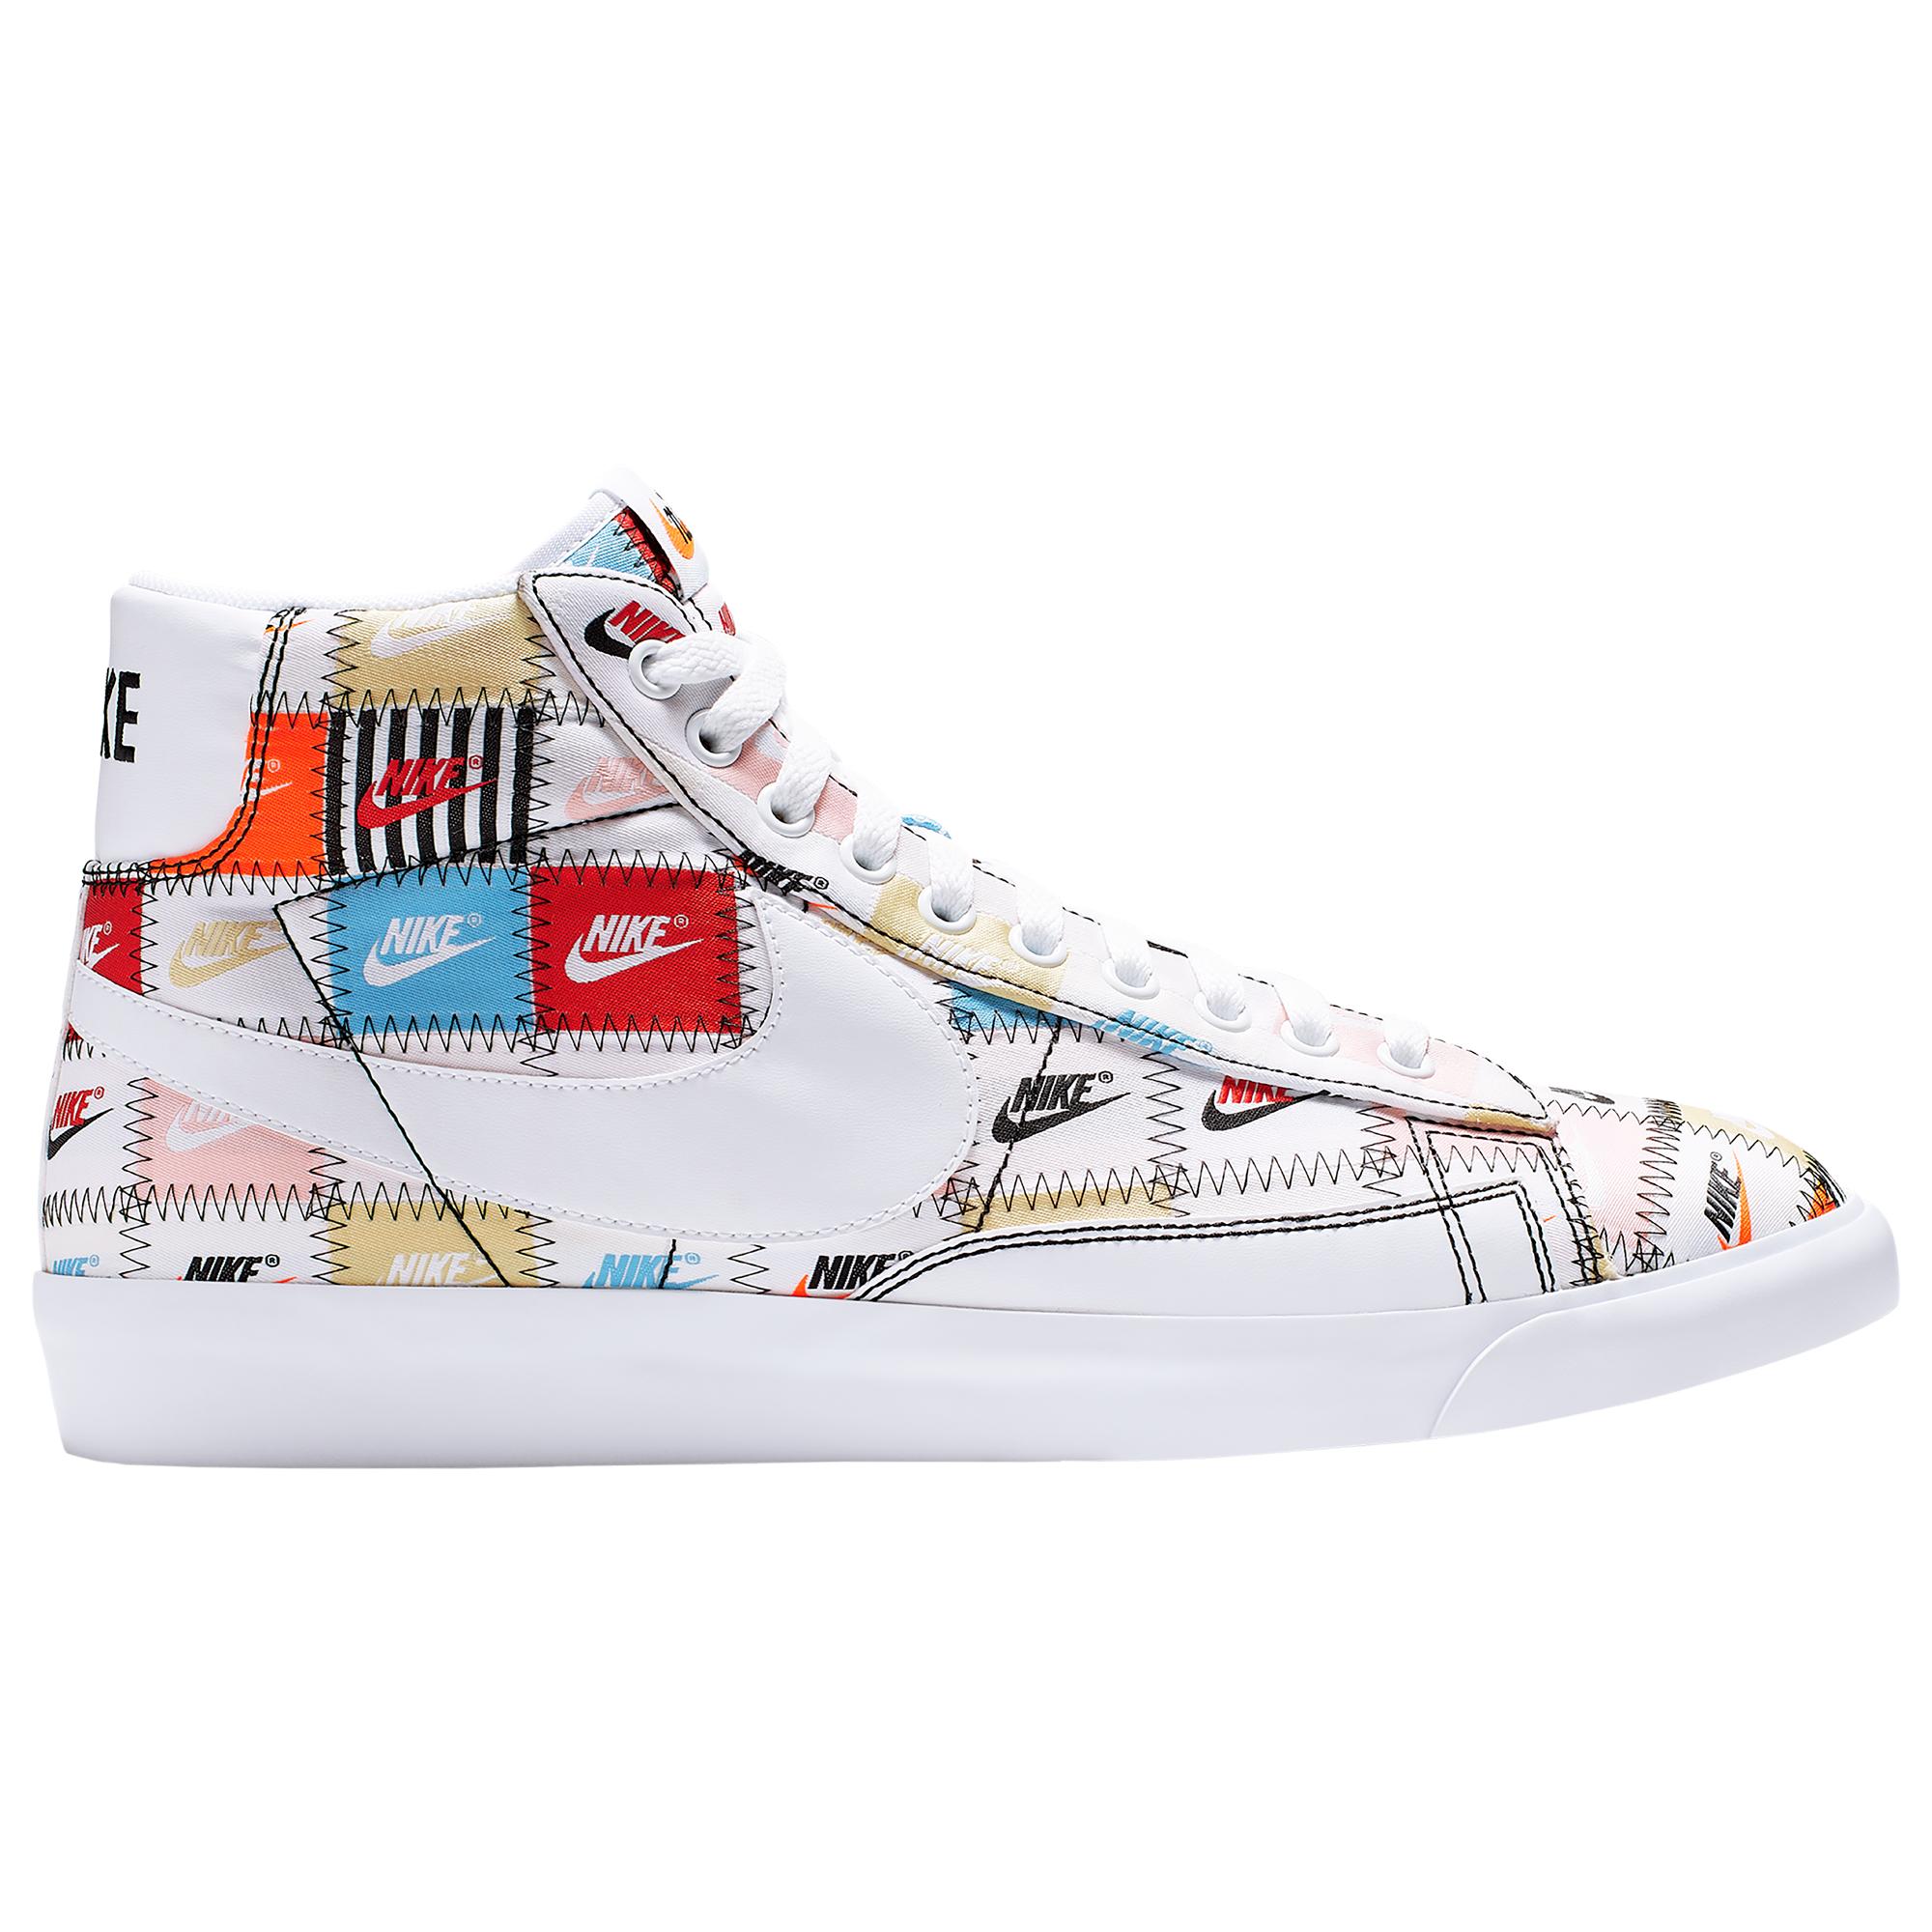 Nike Leather Blazer Hi Patches - Shoes 